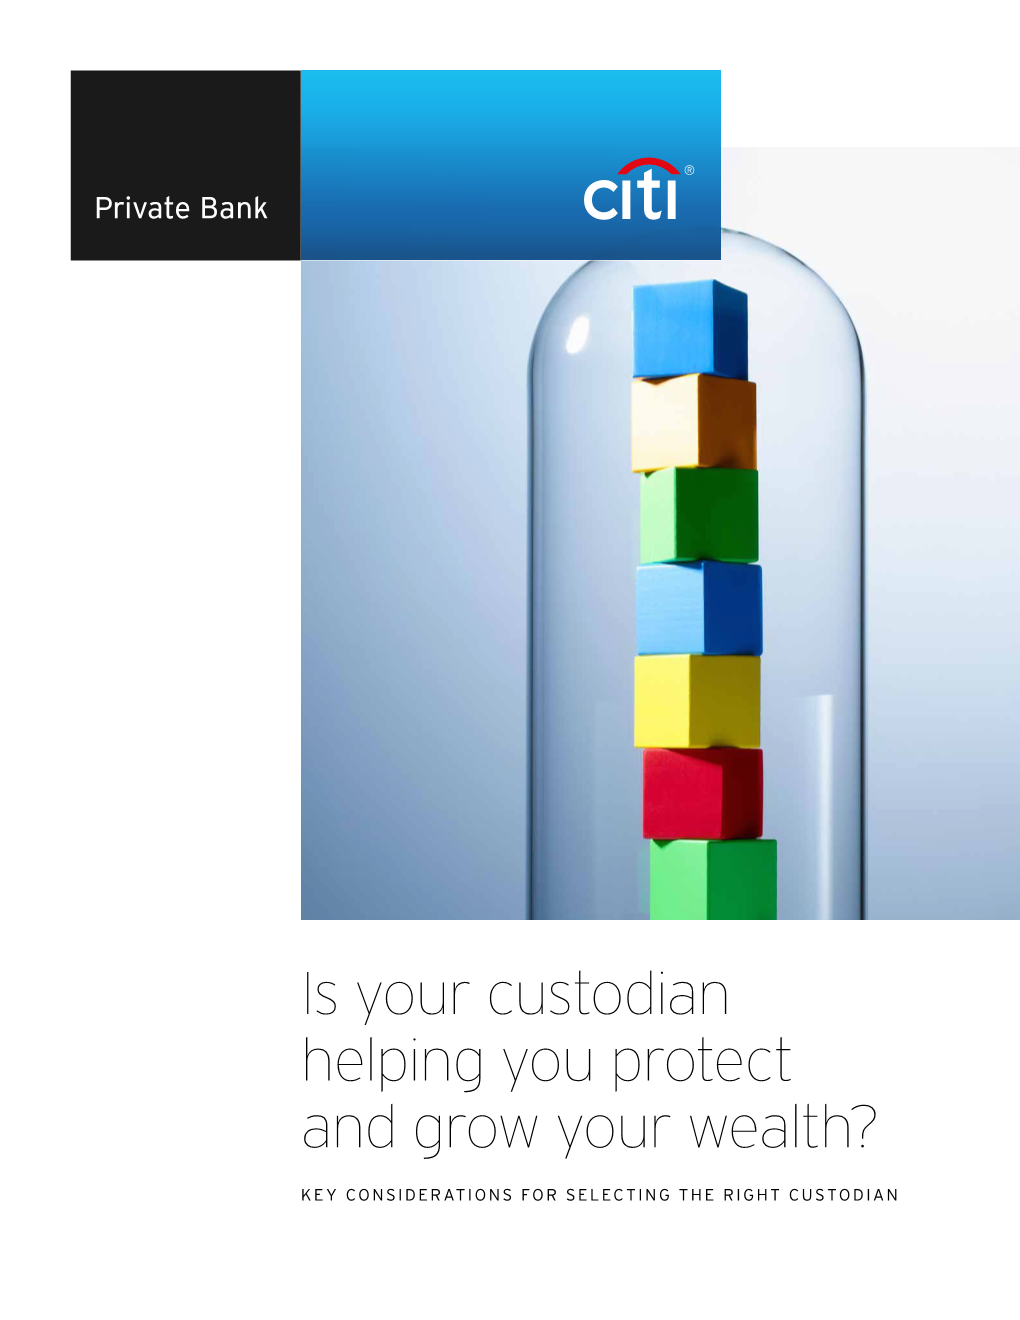 Is Your Custodian Helping You Protect and Grow Your Wealth?